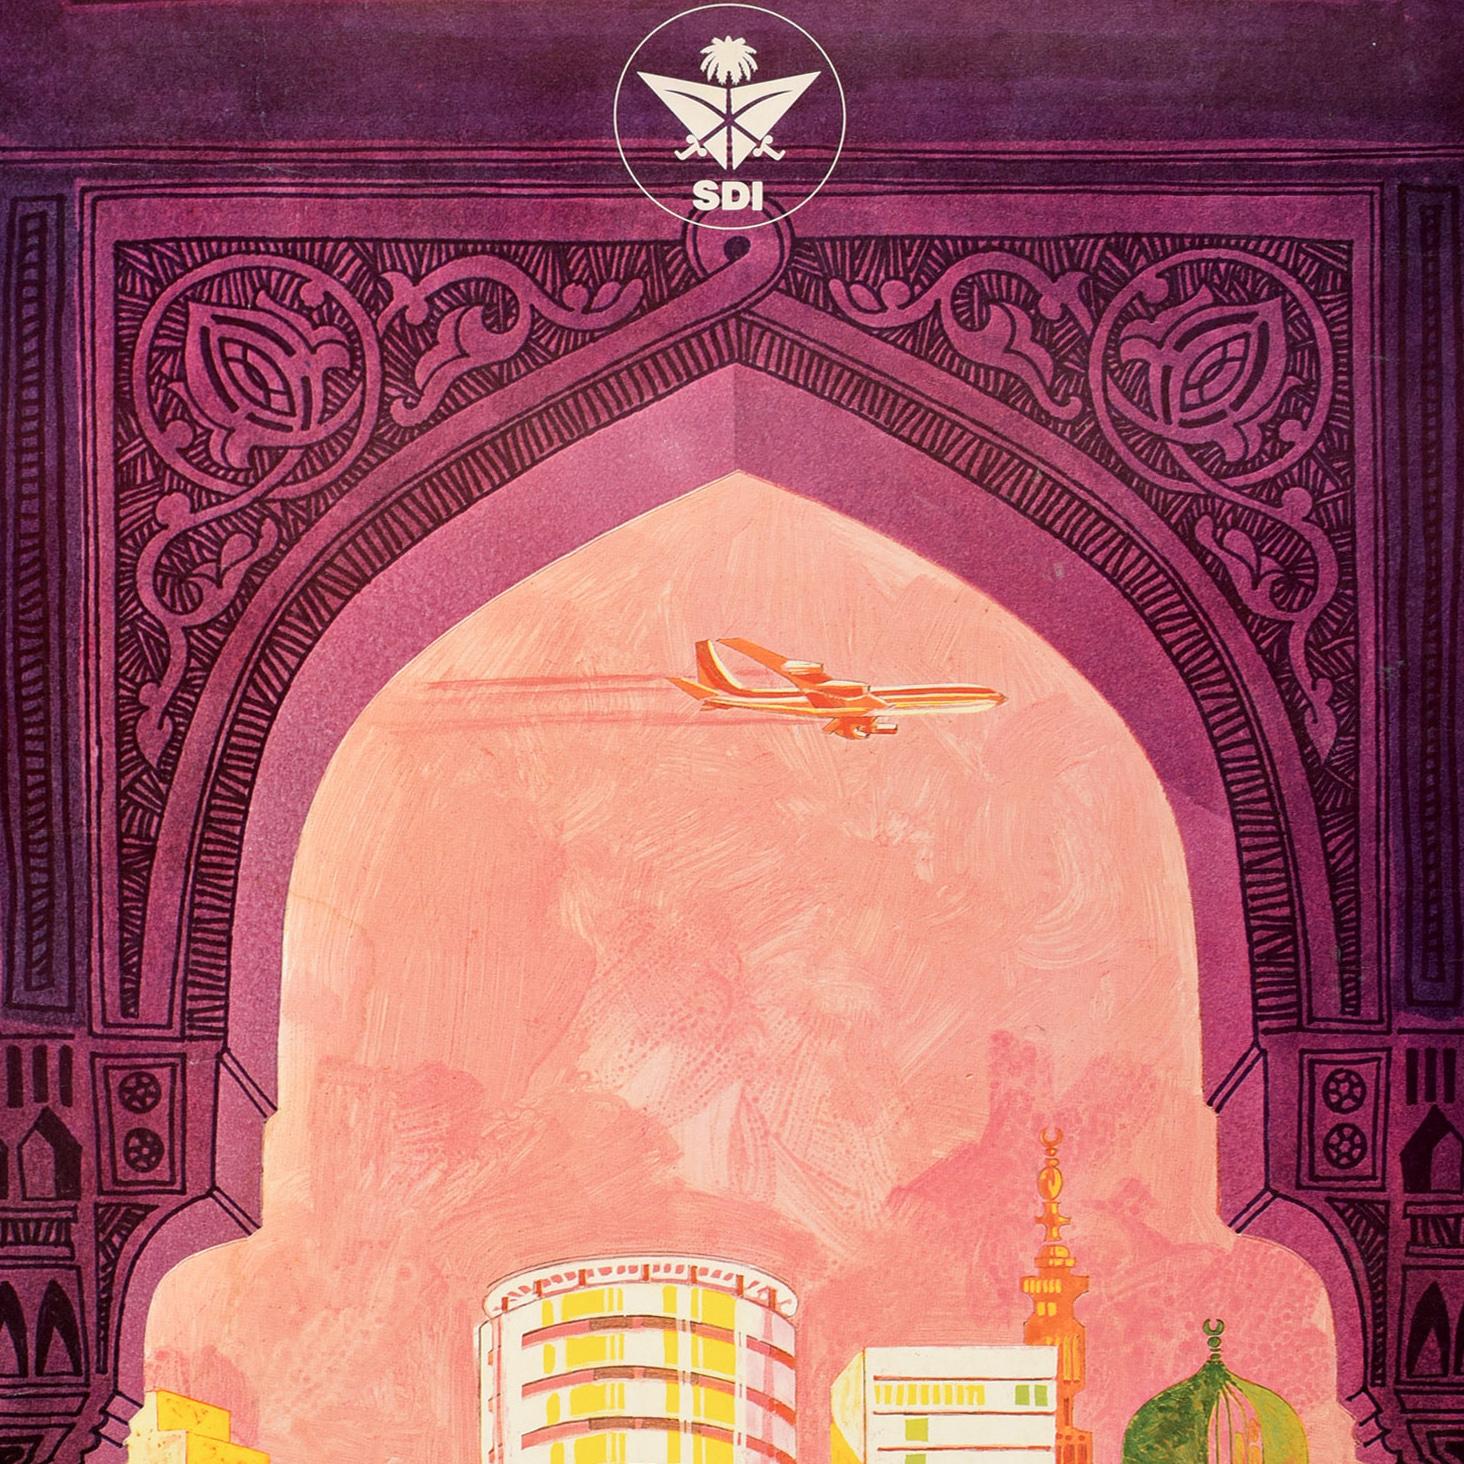 Original vintage Middle East travel poster for Saudi Arabia المملكة العربية السعودية issued by Saudi Arabian Airlines الخطوط الجوية العربية السعودية featuring a colourful city skyline on a pink shaded background with a plane flying overhead viewed